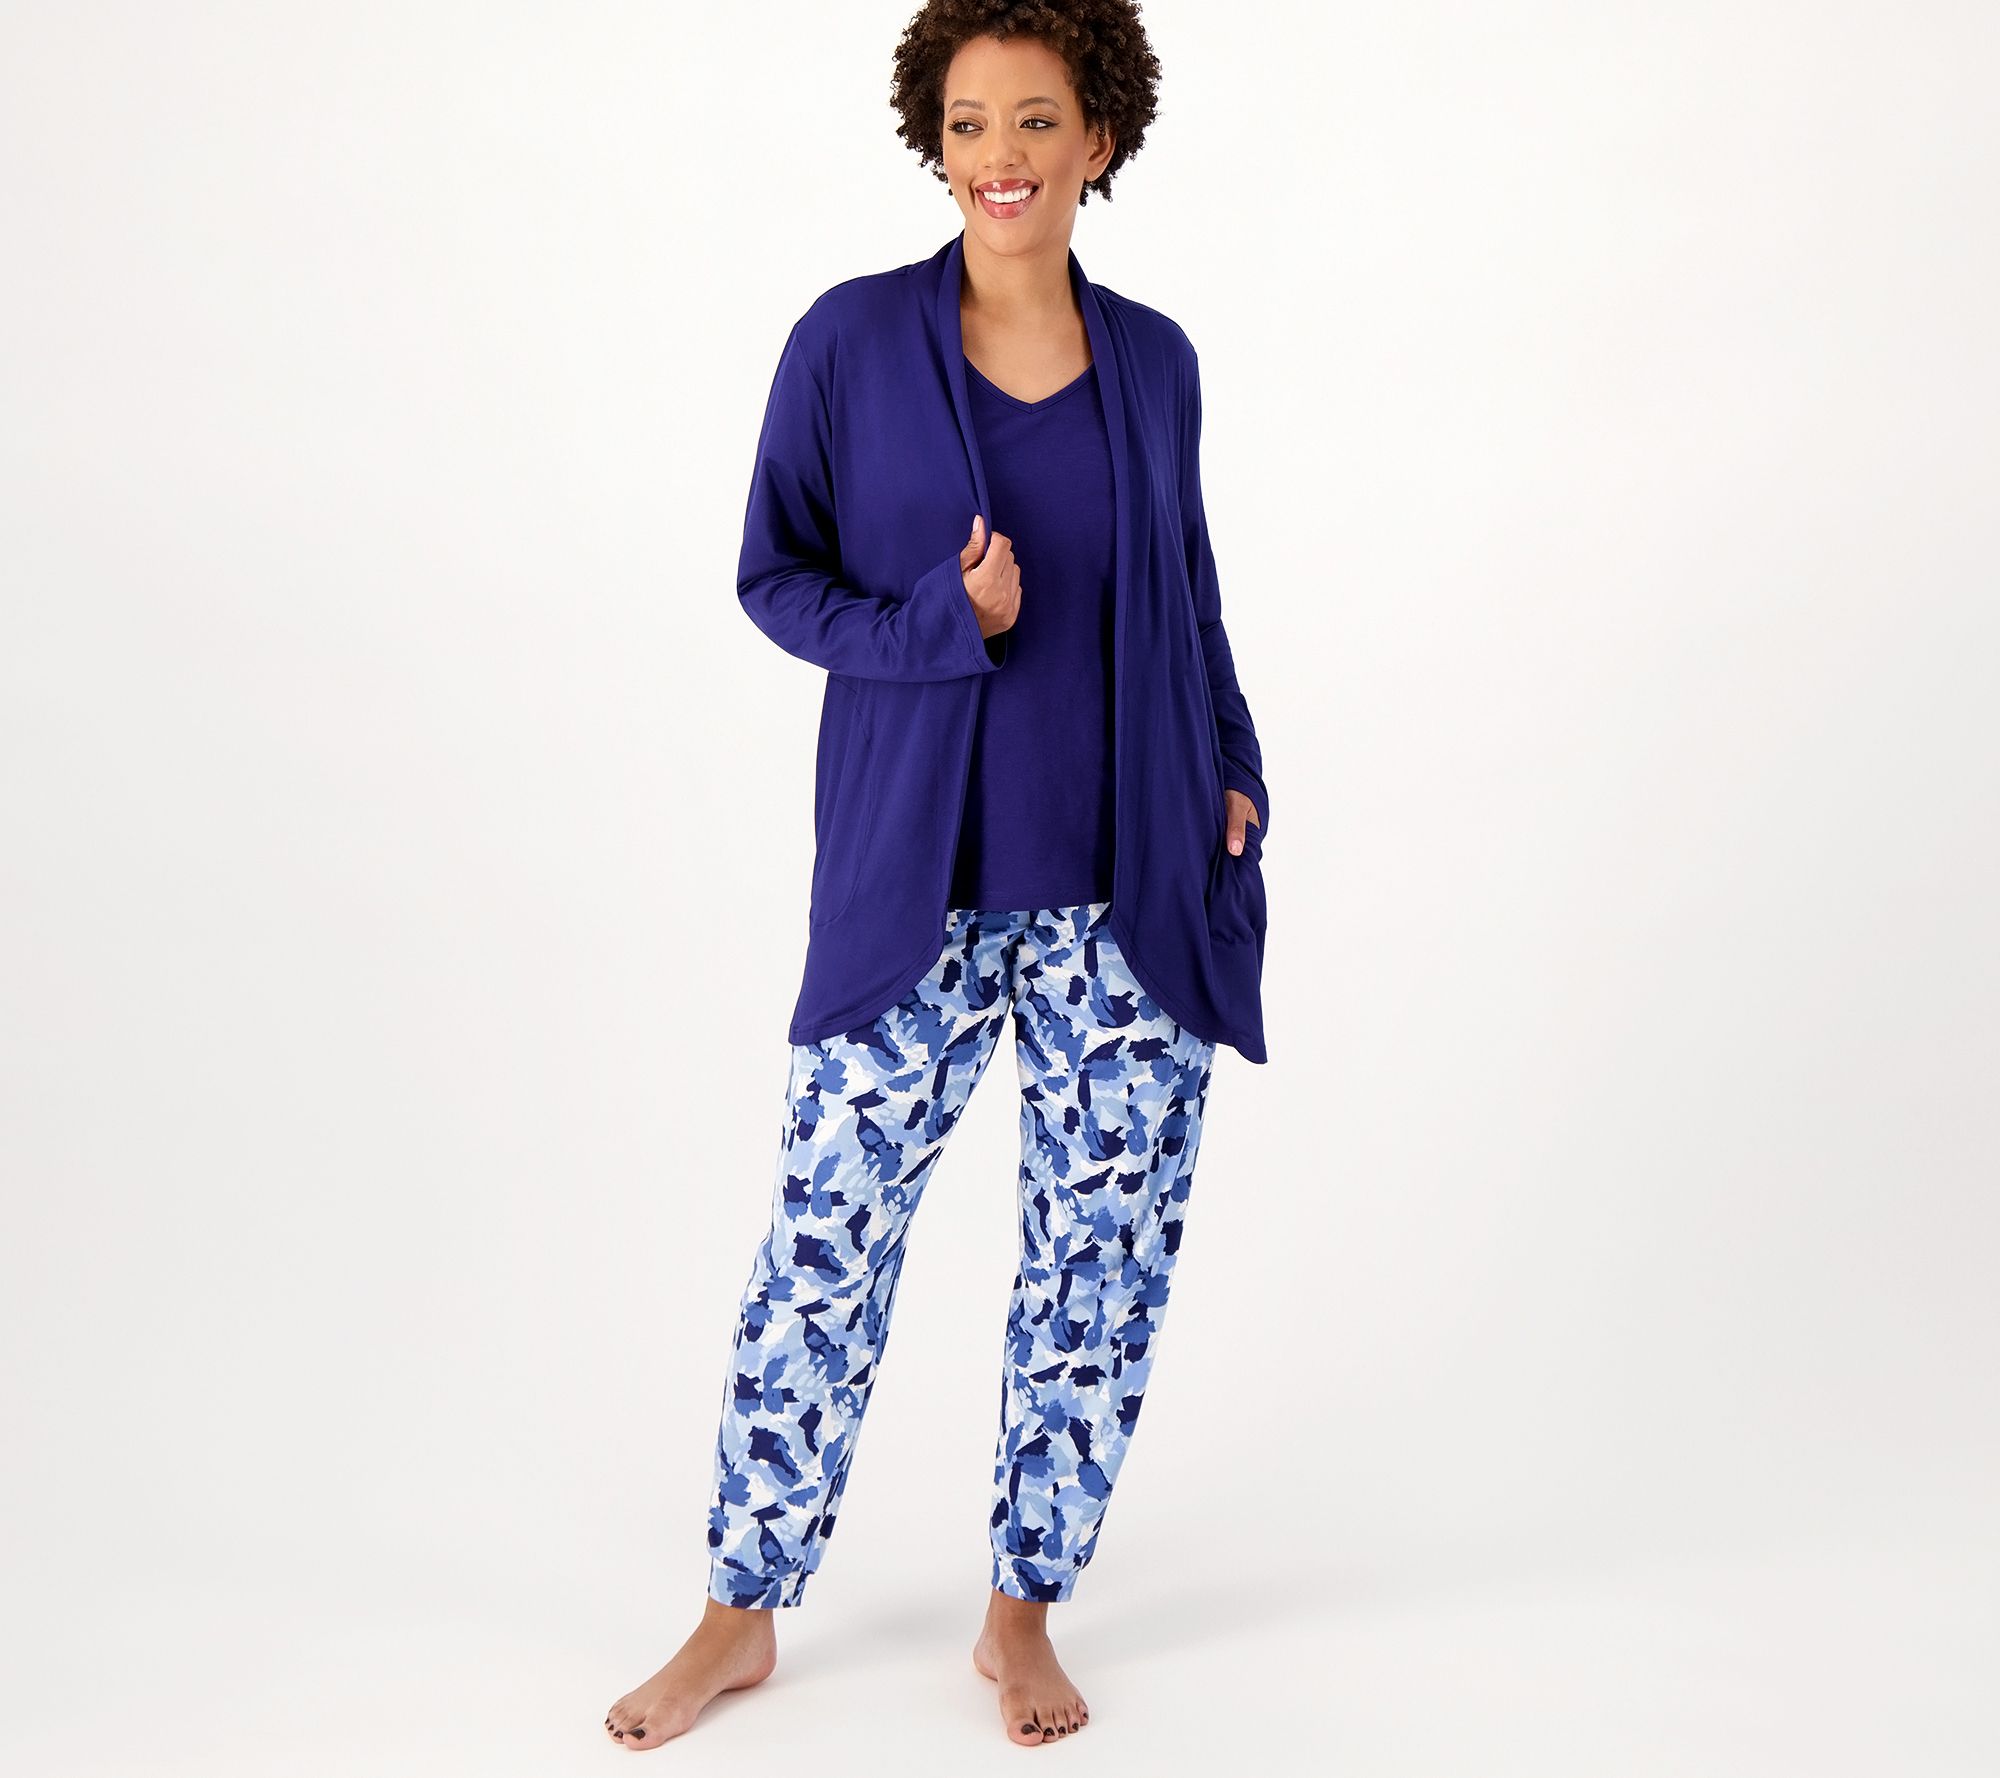 Mixed Knit Set with Pockets Adaptive Clothing for Seniors, Disabled &  Elderly Care